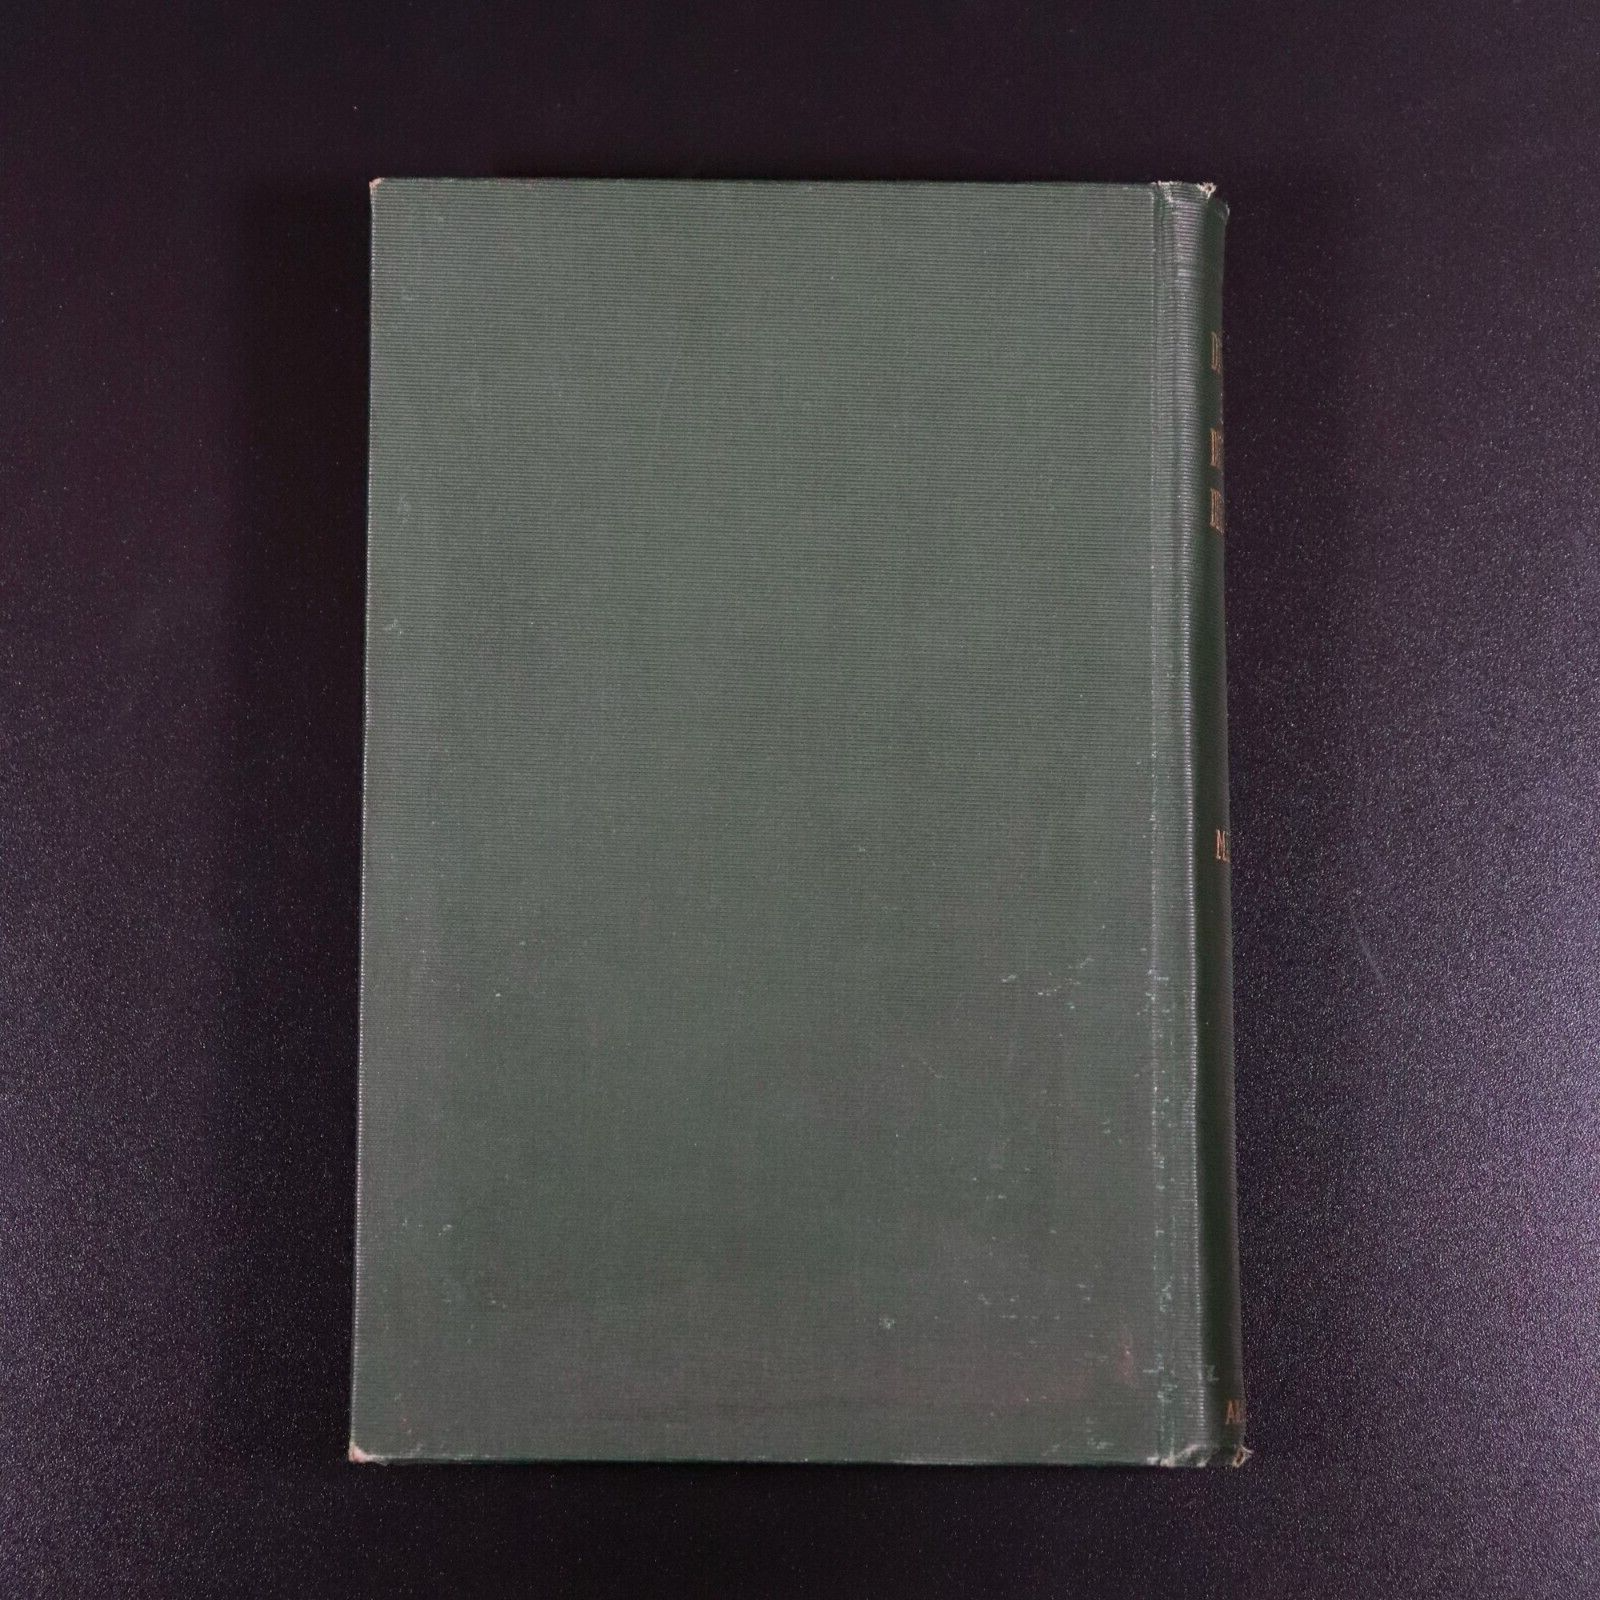 1900 Doctrine & Doctrinal Disruption by W.H. Mallock Antique Theology Book